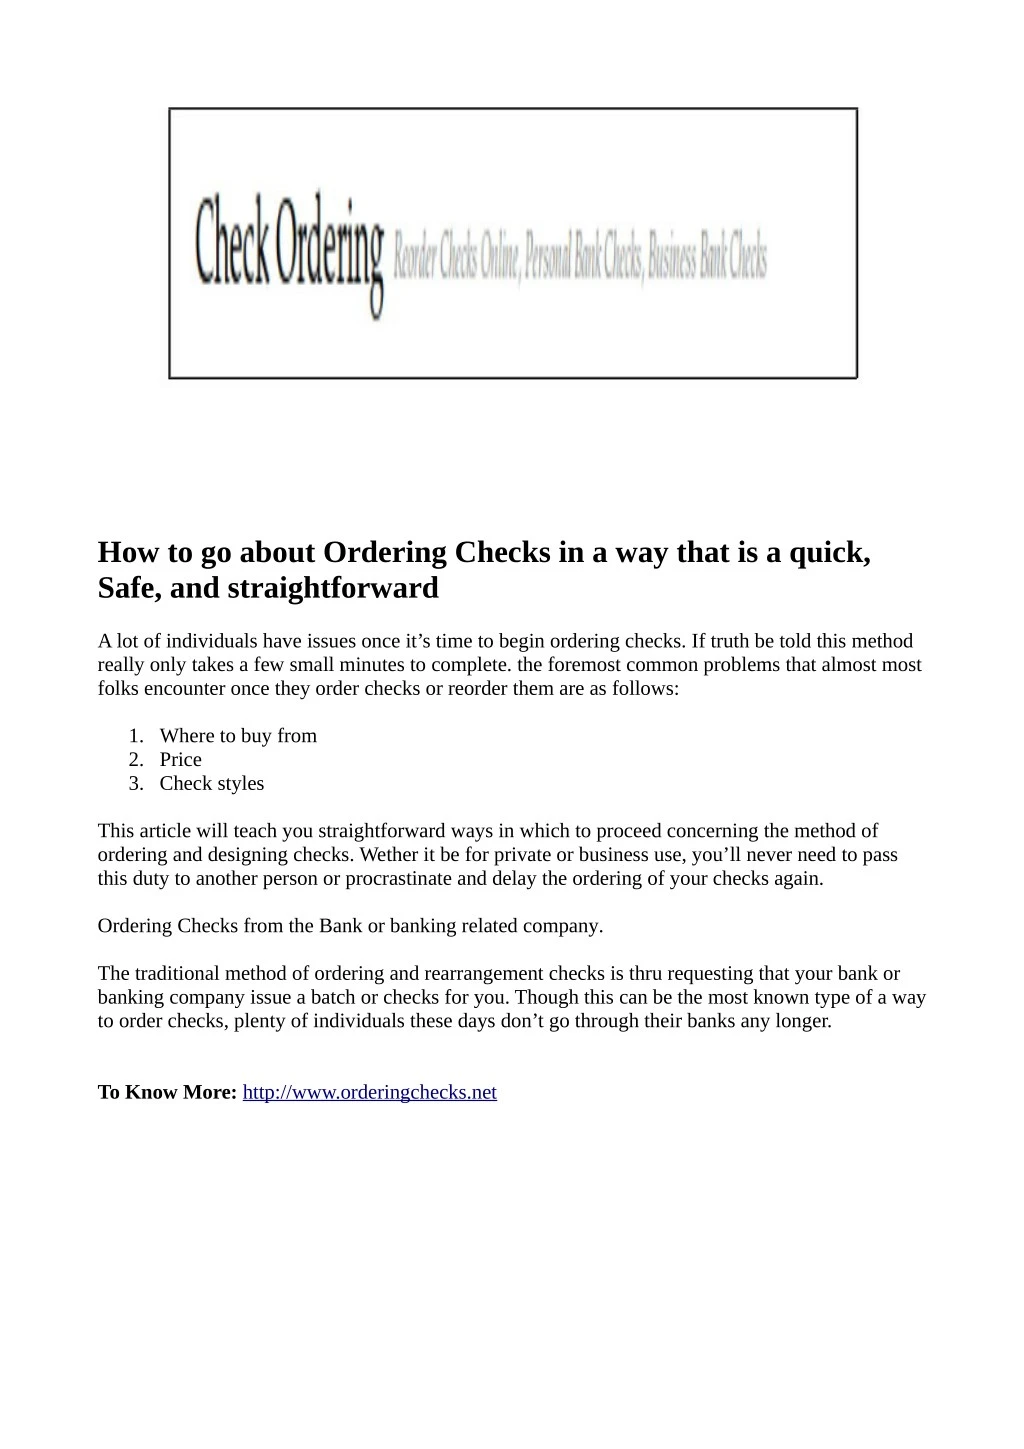 how to go about ordering checks in a way that